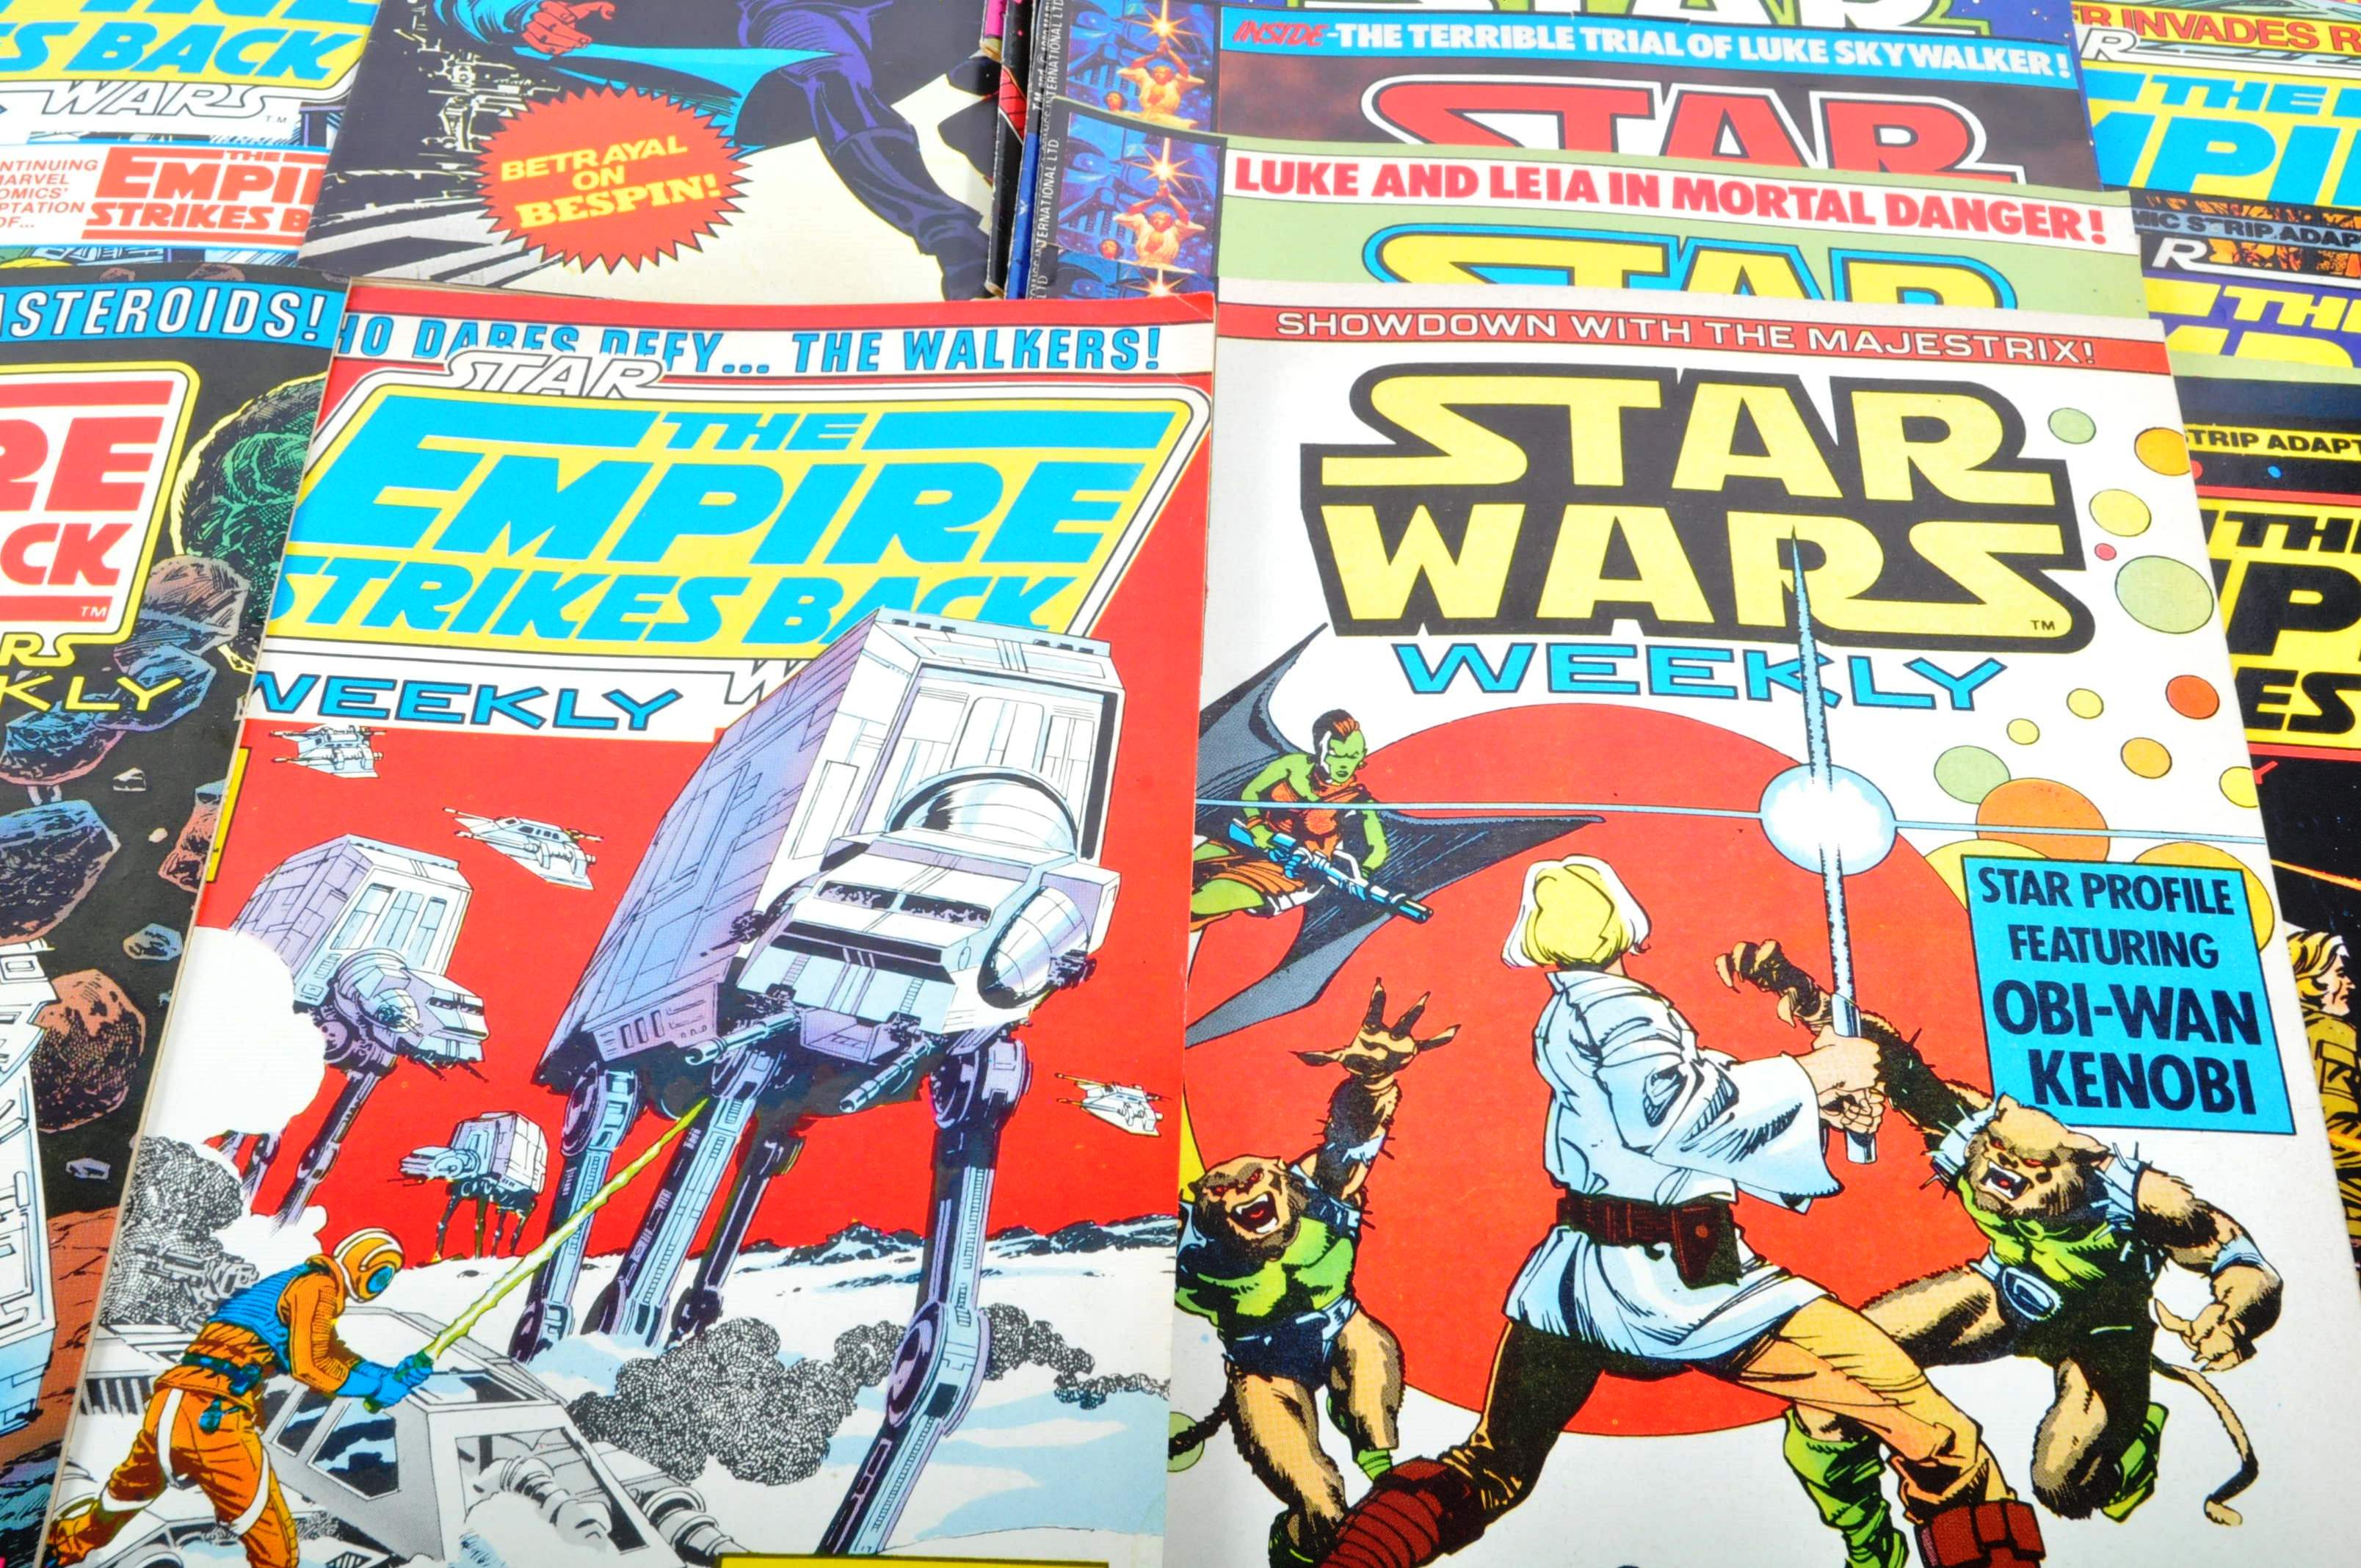 STAR WARS - COLLECTION OF MARVEL STAR WARS WEEKLY COMIC BOOKS - Image 9 of 9